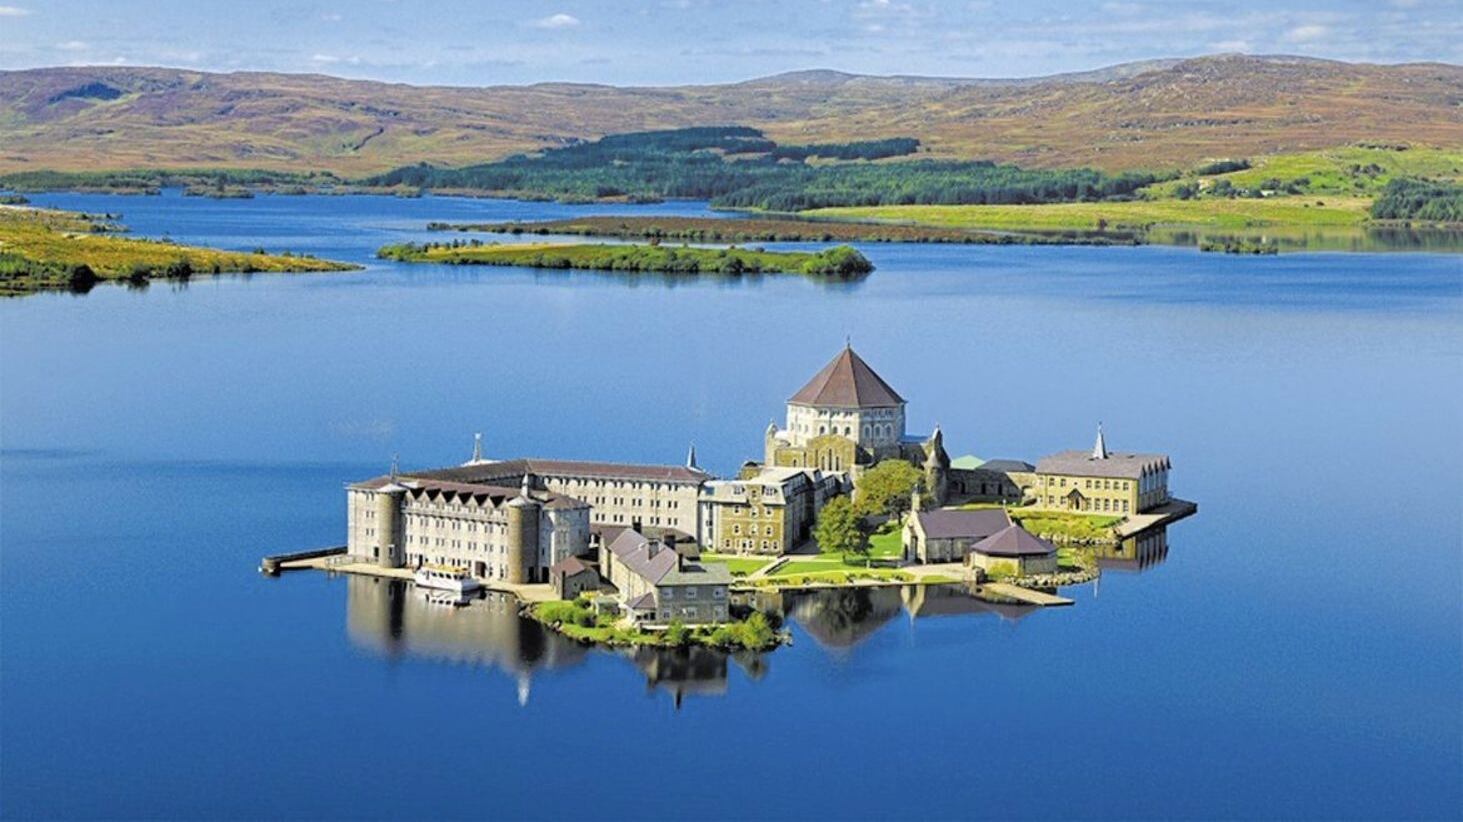 After two years of pandemic-enforced closure, Lough Derg is looking forward to offering a full pilgrimage programme this year. 